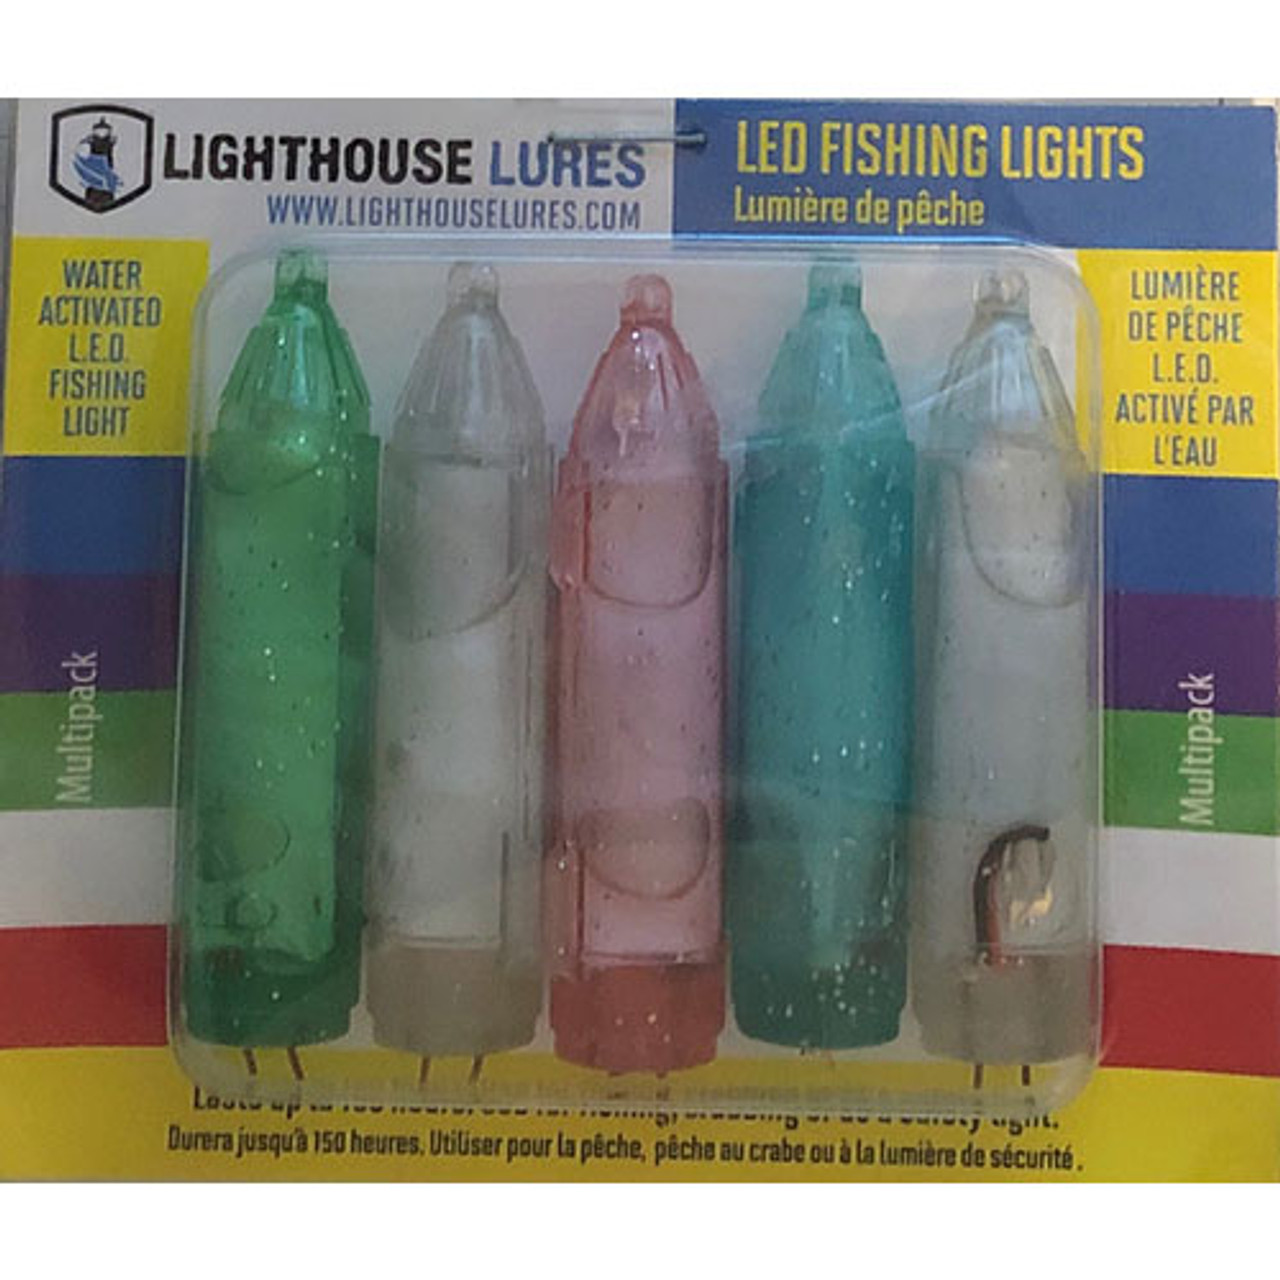 Lighthouse Lures LED Fishing Lights - The Harbour Chandler